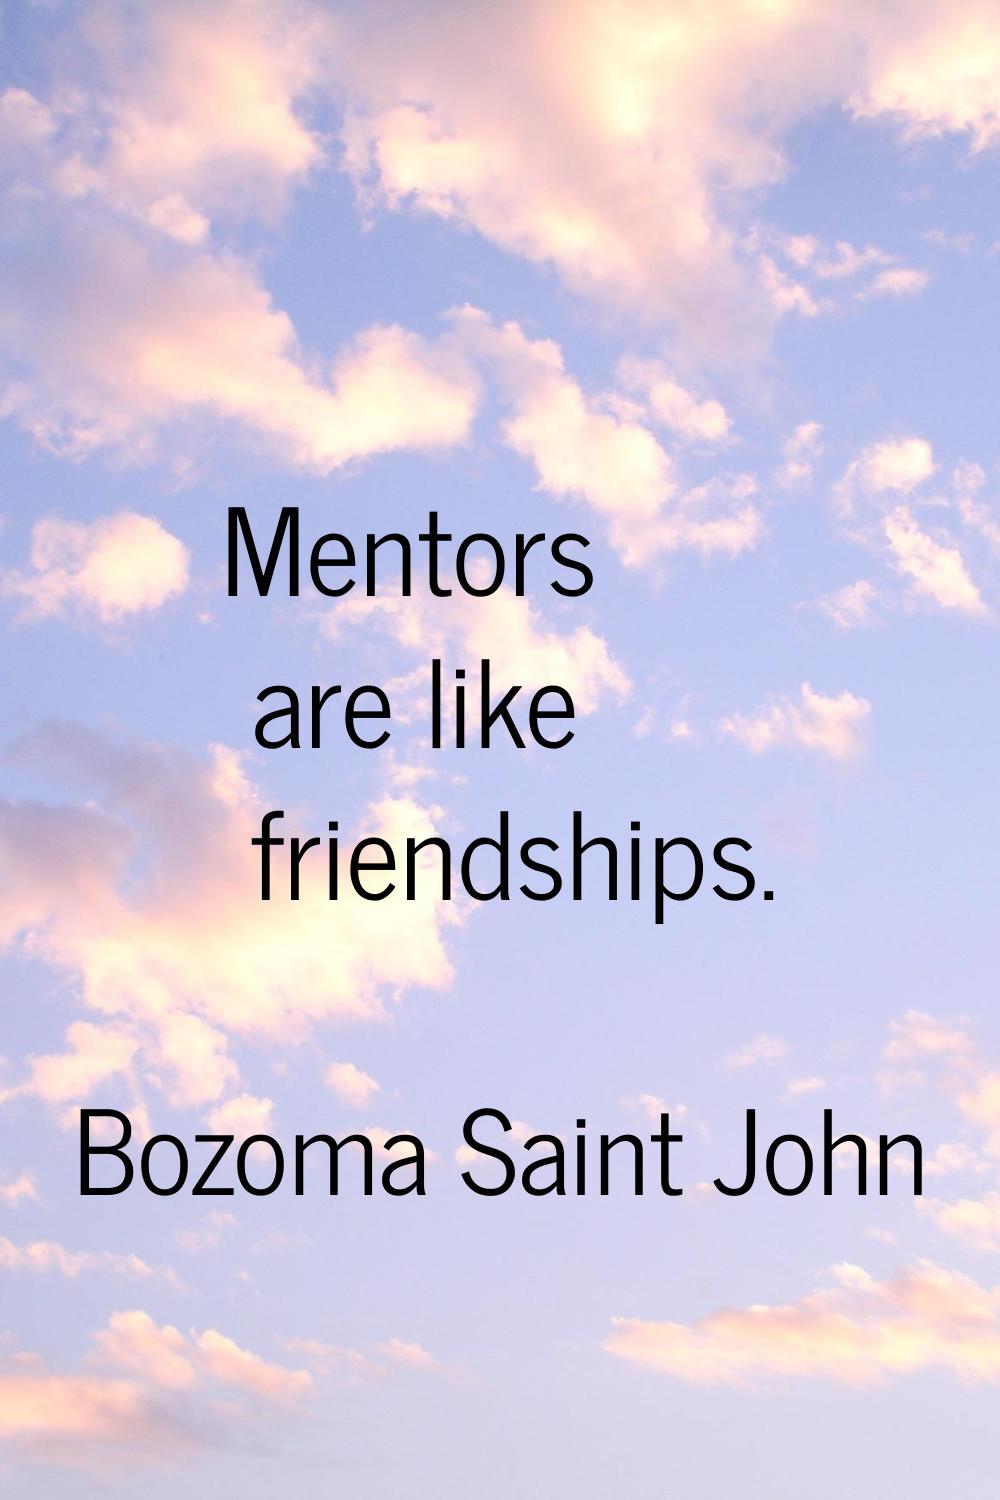 Mentors are like friendships.